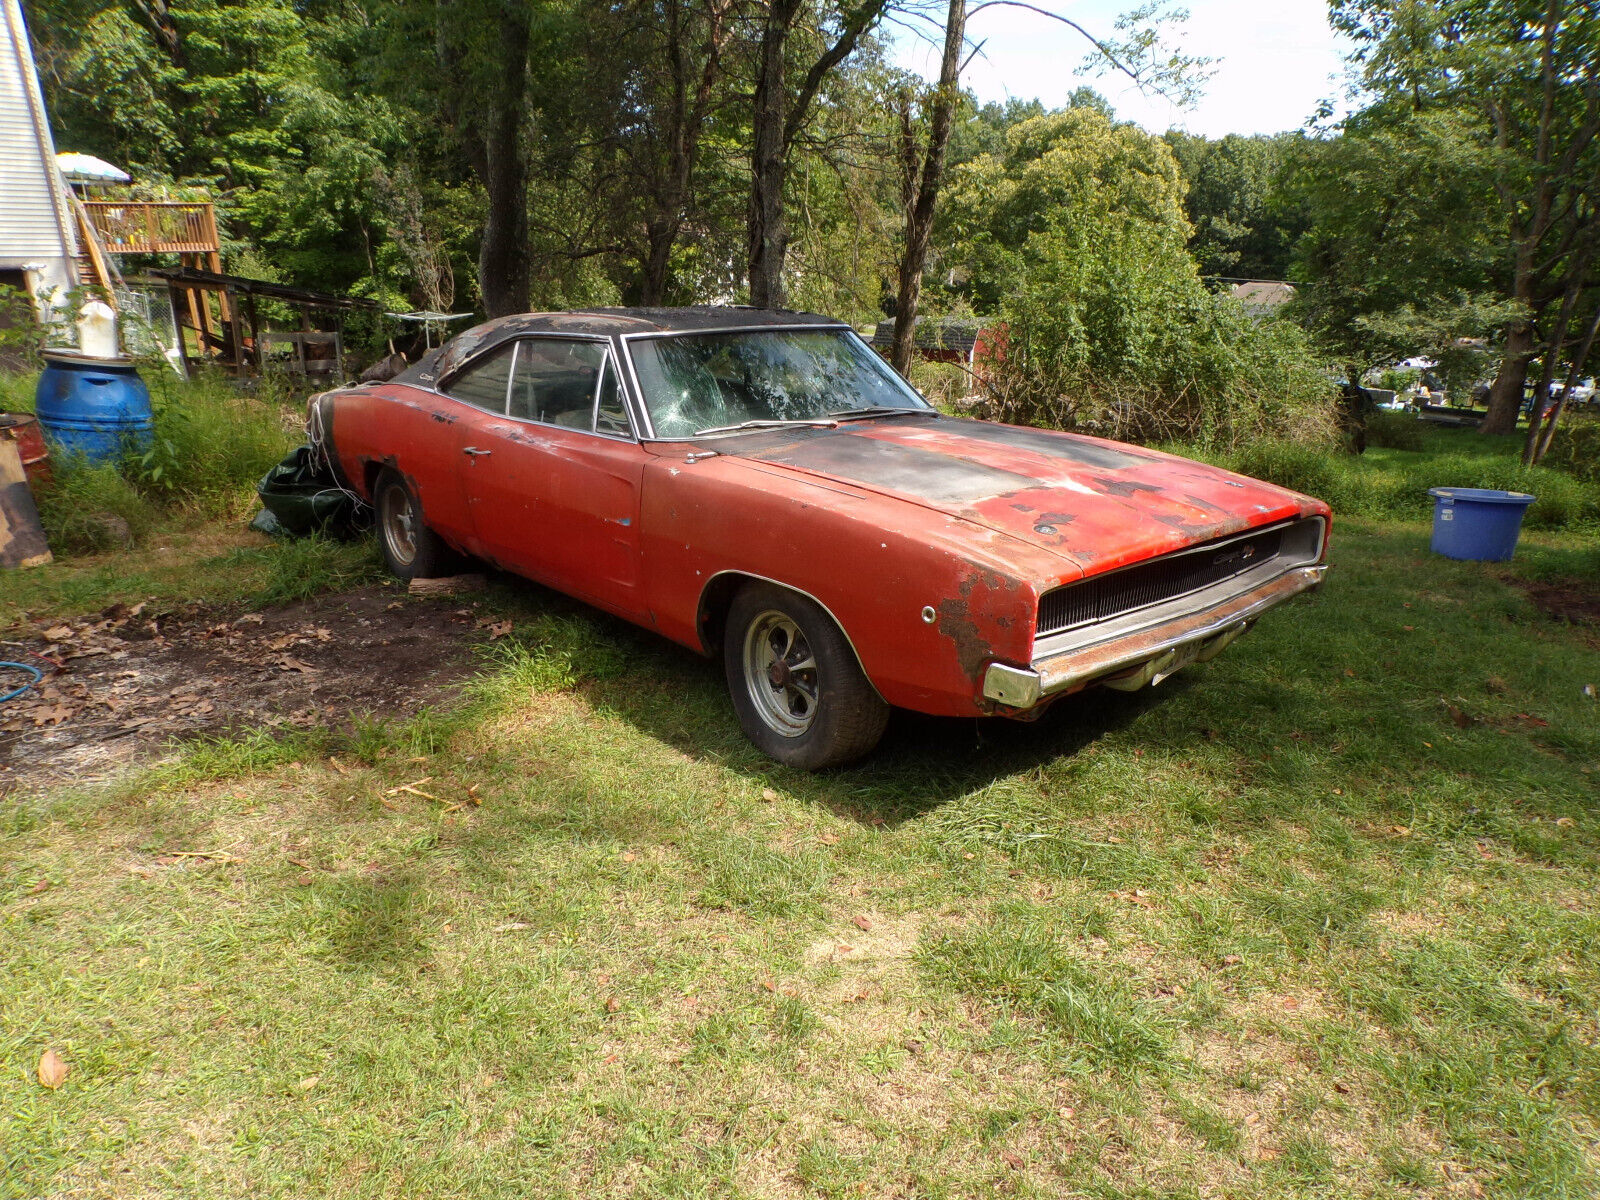 1969 Dodge Charger R/T Rotting Away on Private Property Deserves a Better  Life - autoevolution